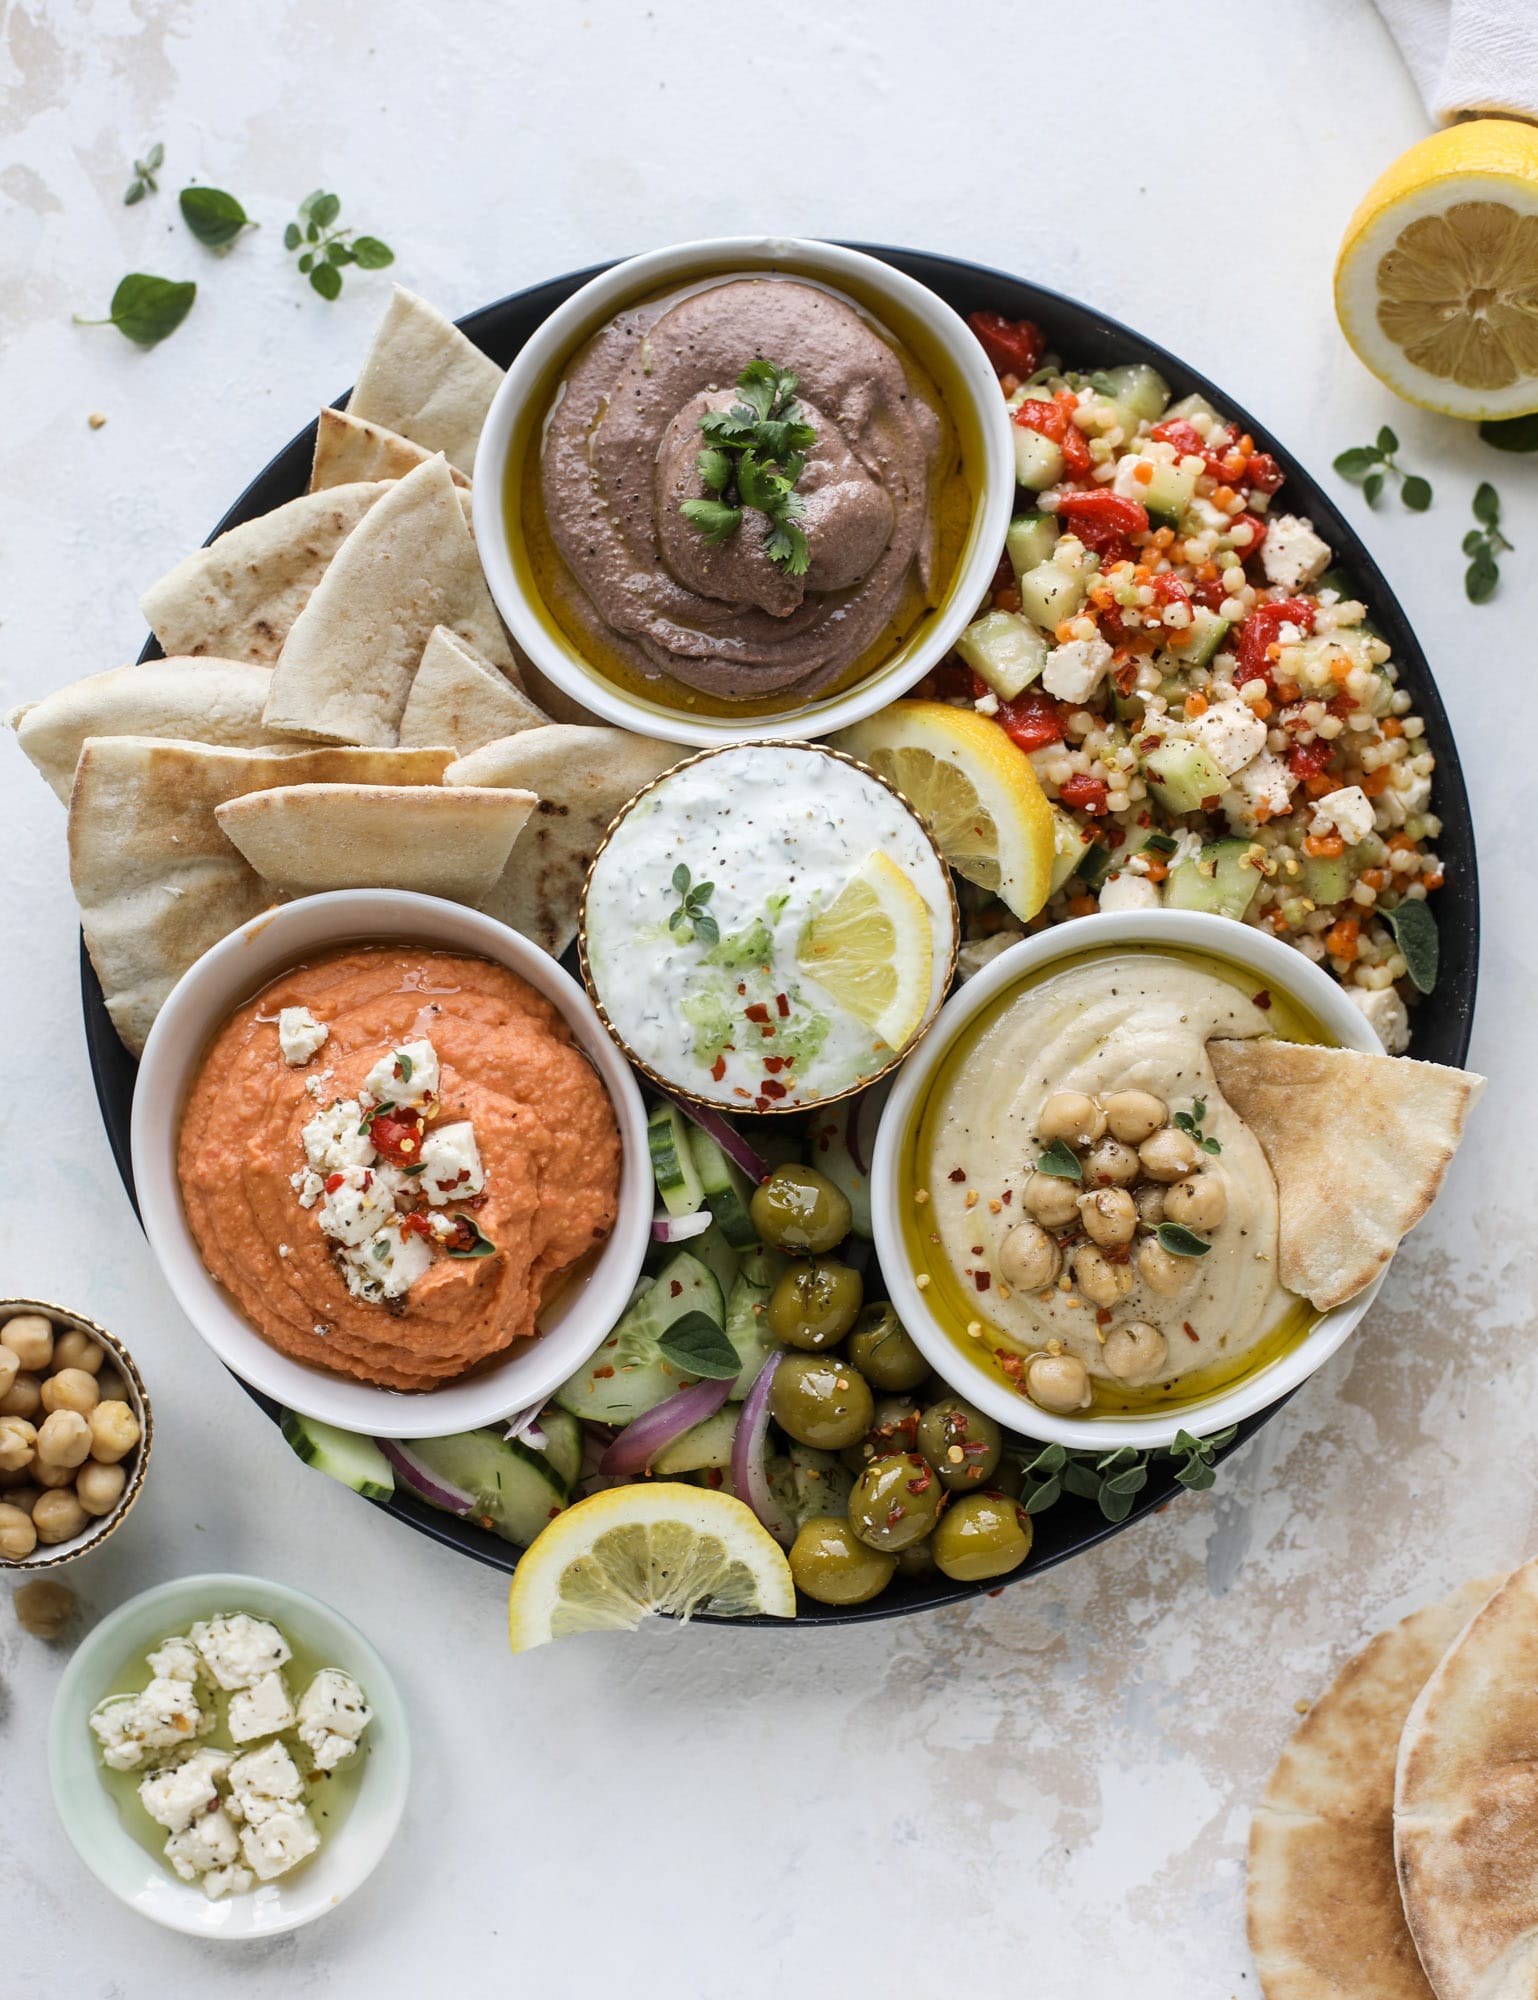 Here you can find out how to make the perfect hummus platter! This trio includes caramelized onion hummus, smoky black bean hummus and roasted red pepper white bean hummus, along with a couscous salad and quick tzatziki! I howsweeteats.com #hummus #platter #appetizer #snack #chickpeas #healthy #blackbeans #yogurt #tzatziki